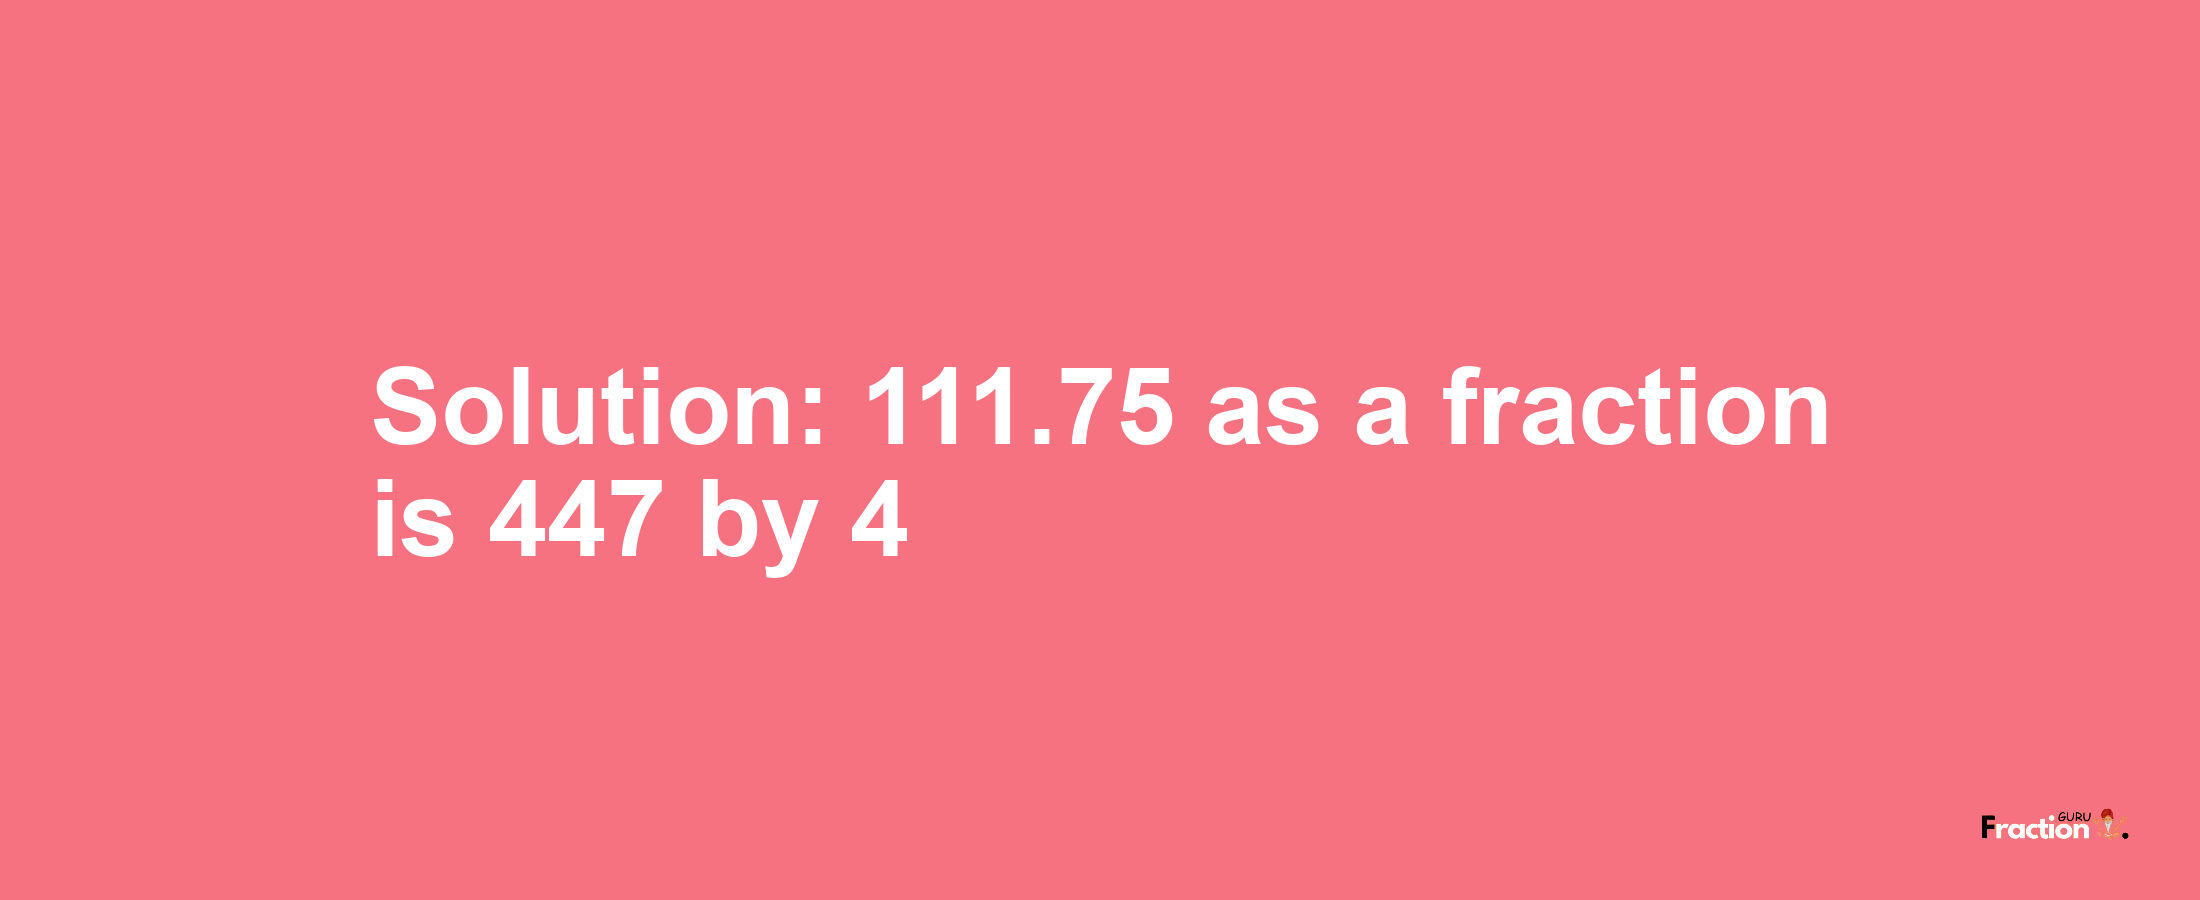 Solution:111.75 as a fraction is 447/4